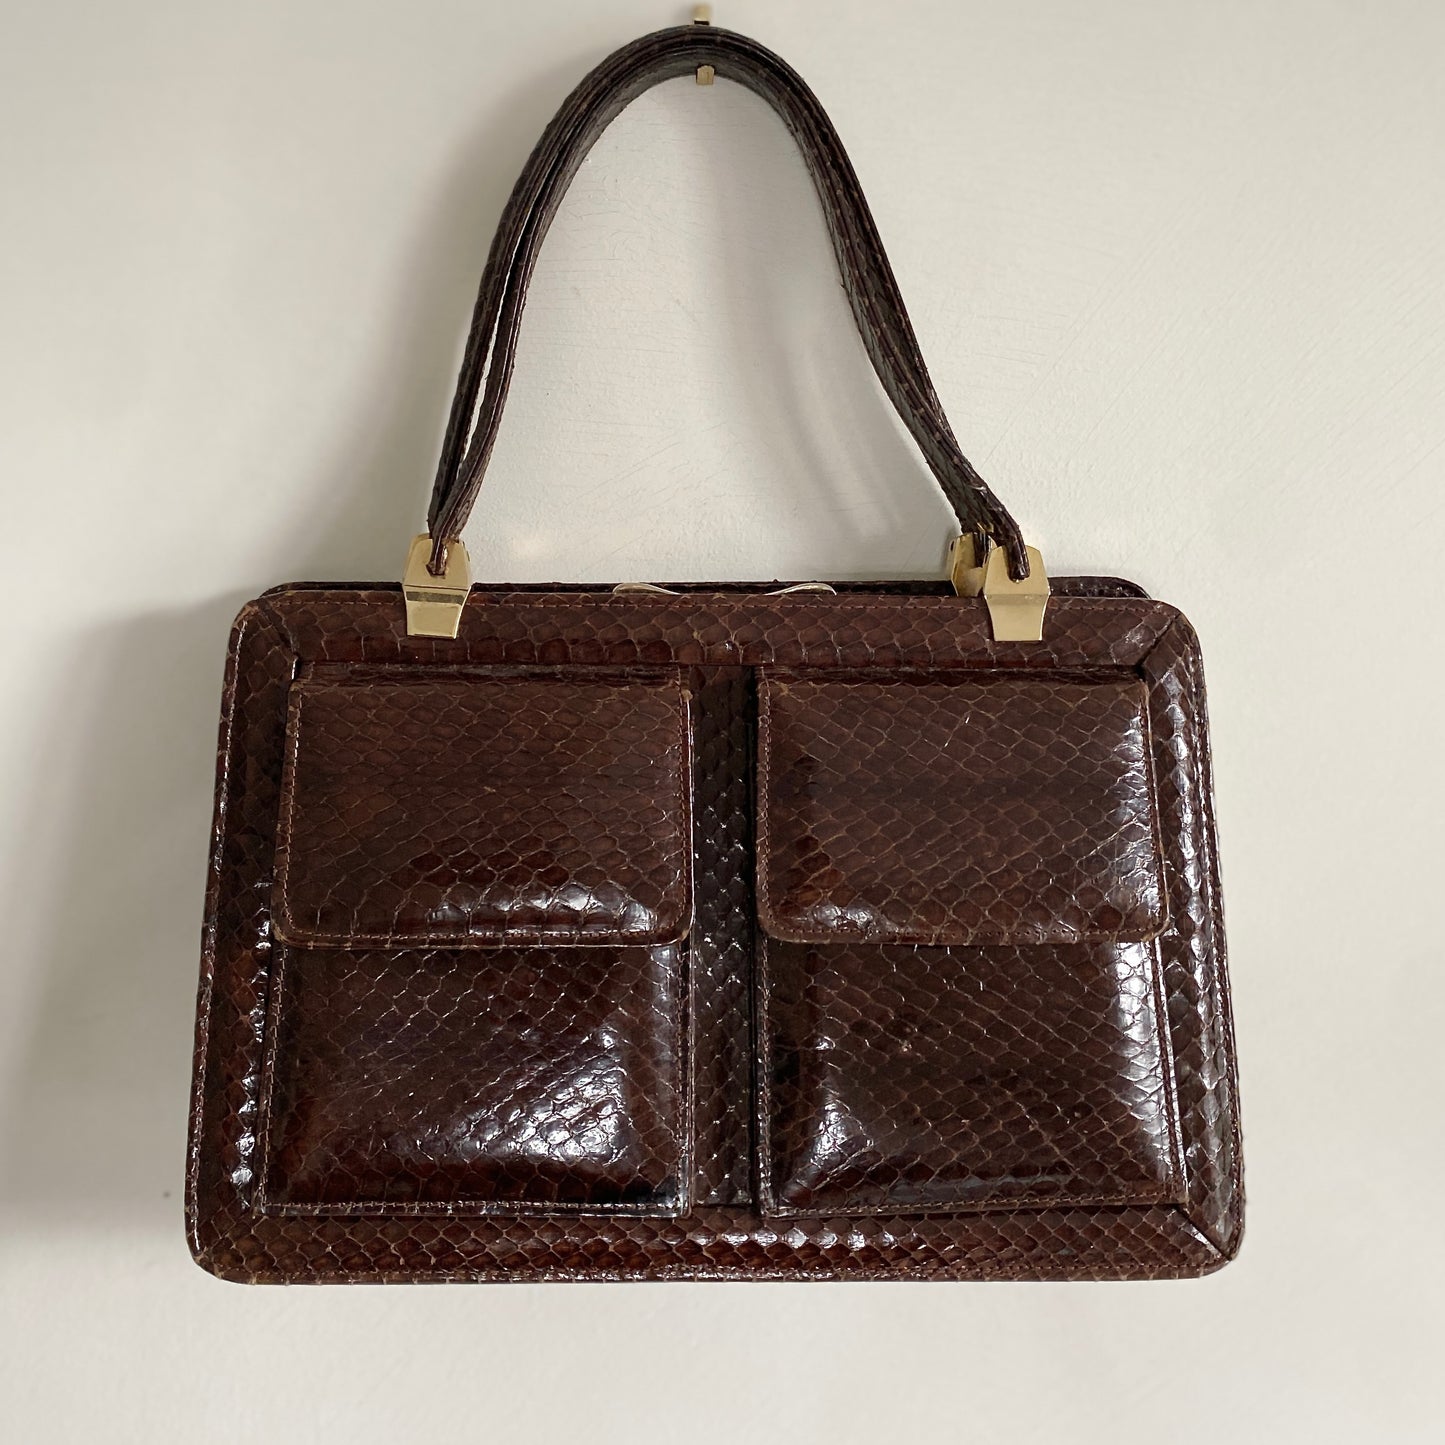 Late 70s Vintage brown leather snake skin bag Top handles Two front pockets Three internal pocket Clasp fastening Internal zip pocket and open pocket Gold colour hardware Fully lined